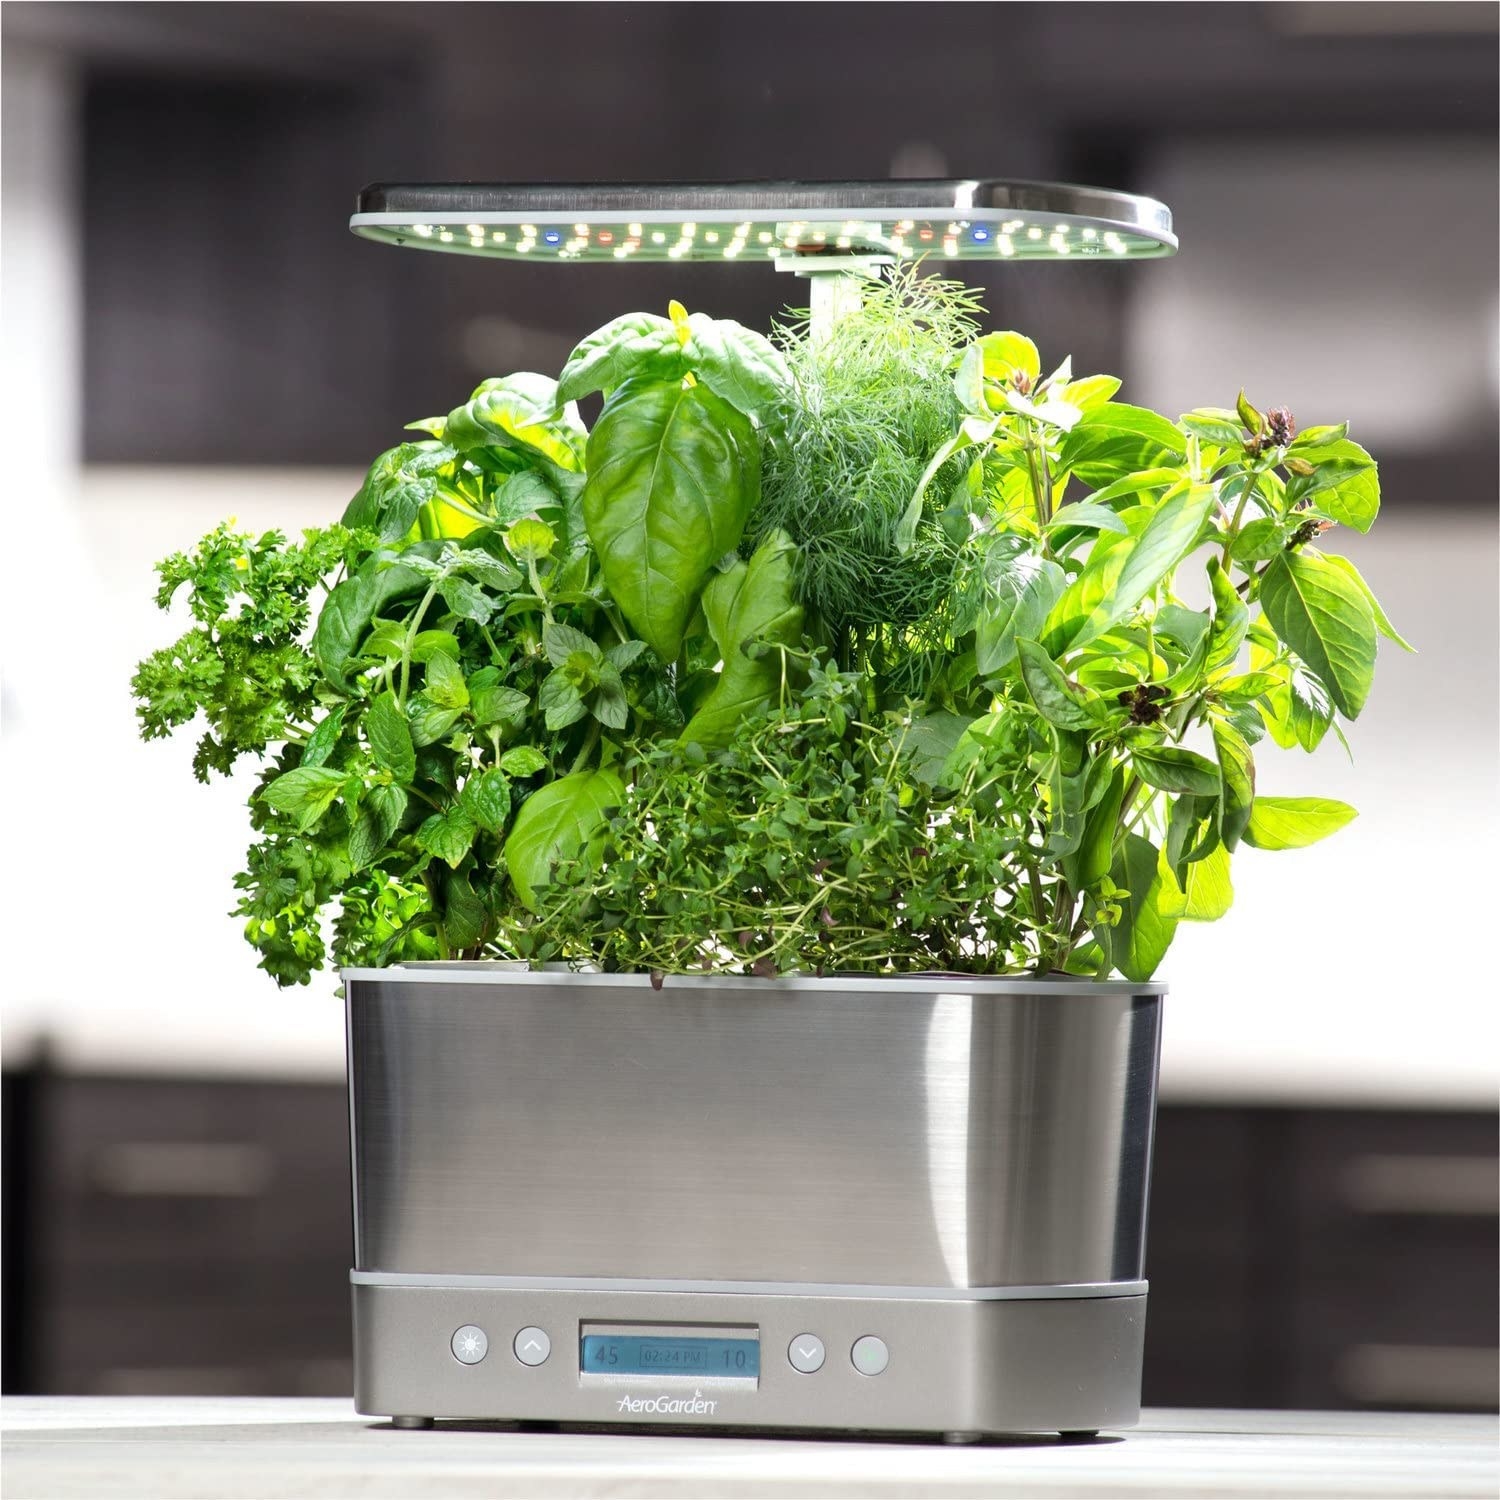 the aerogarden filled with lush herb plants